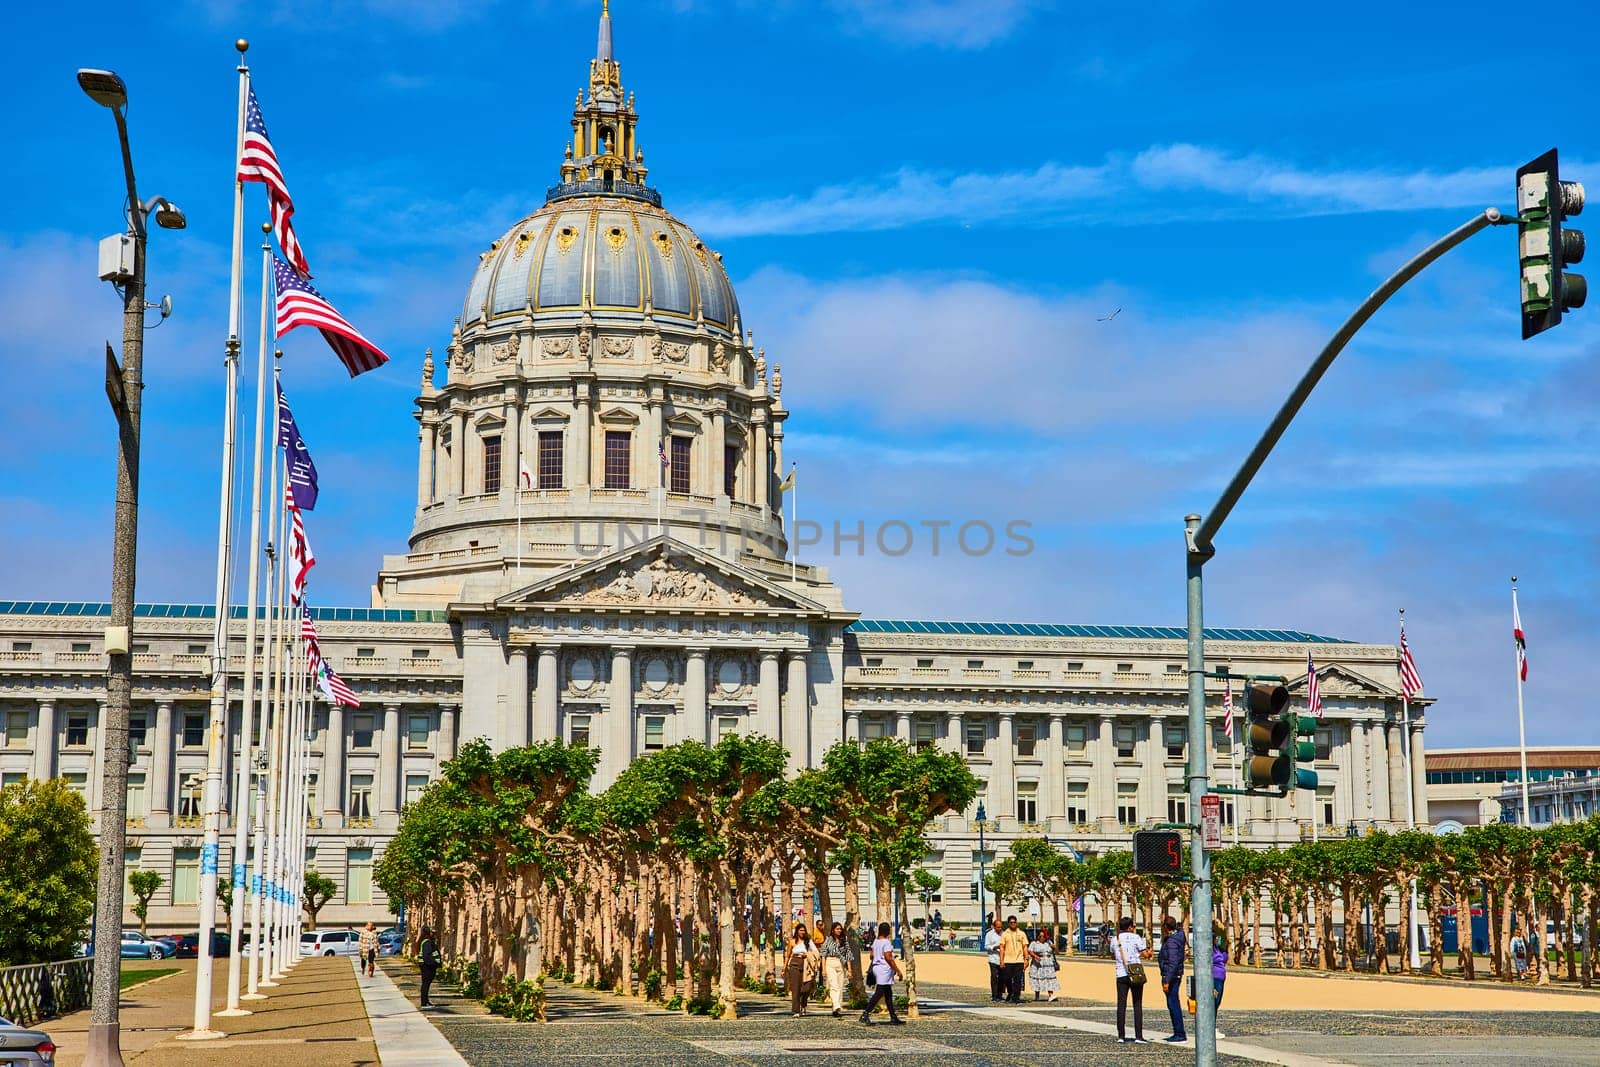 Image of City hall entrance with trees and pedestrian and variety of flags on blue sky day with purple clouds